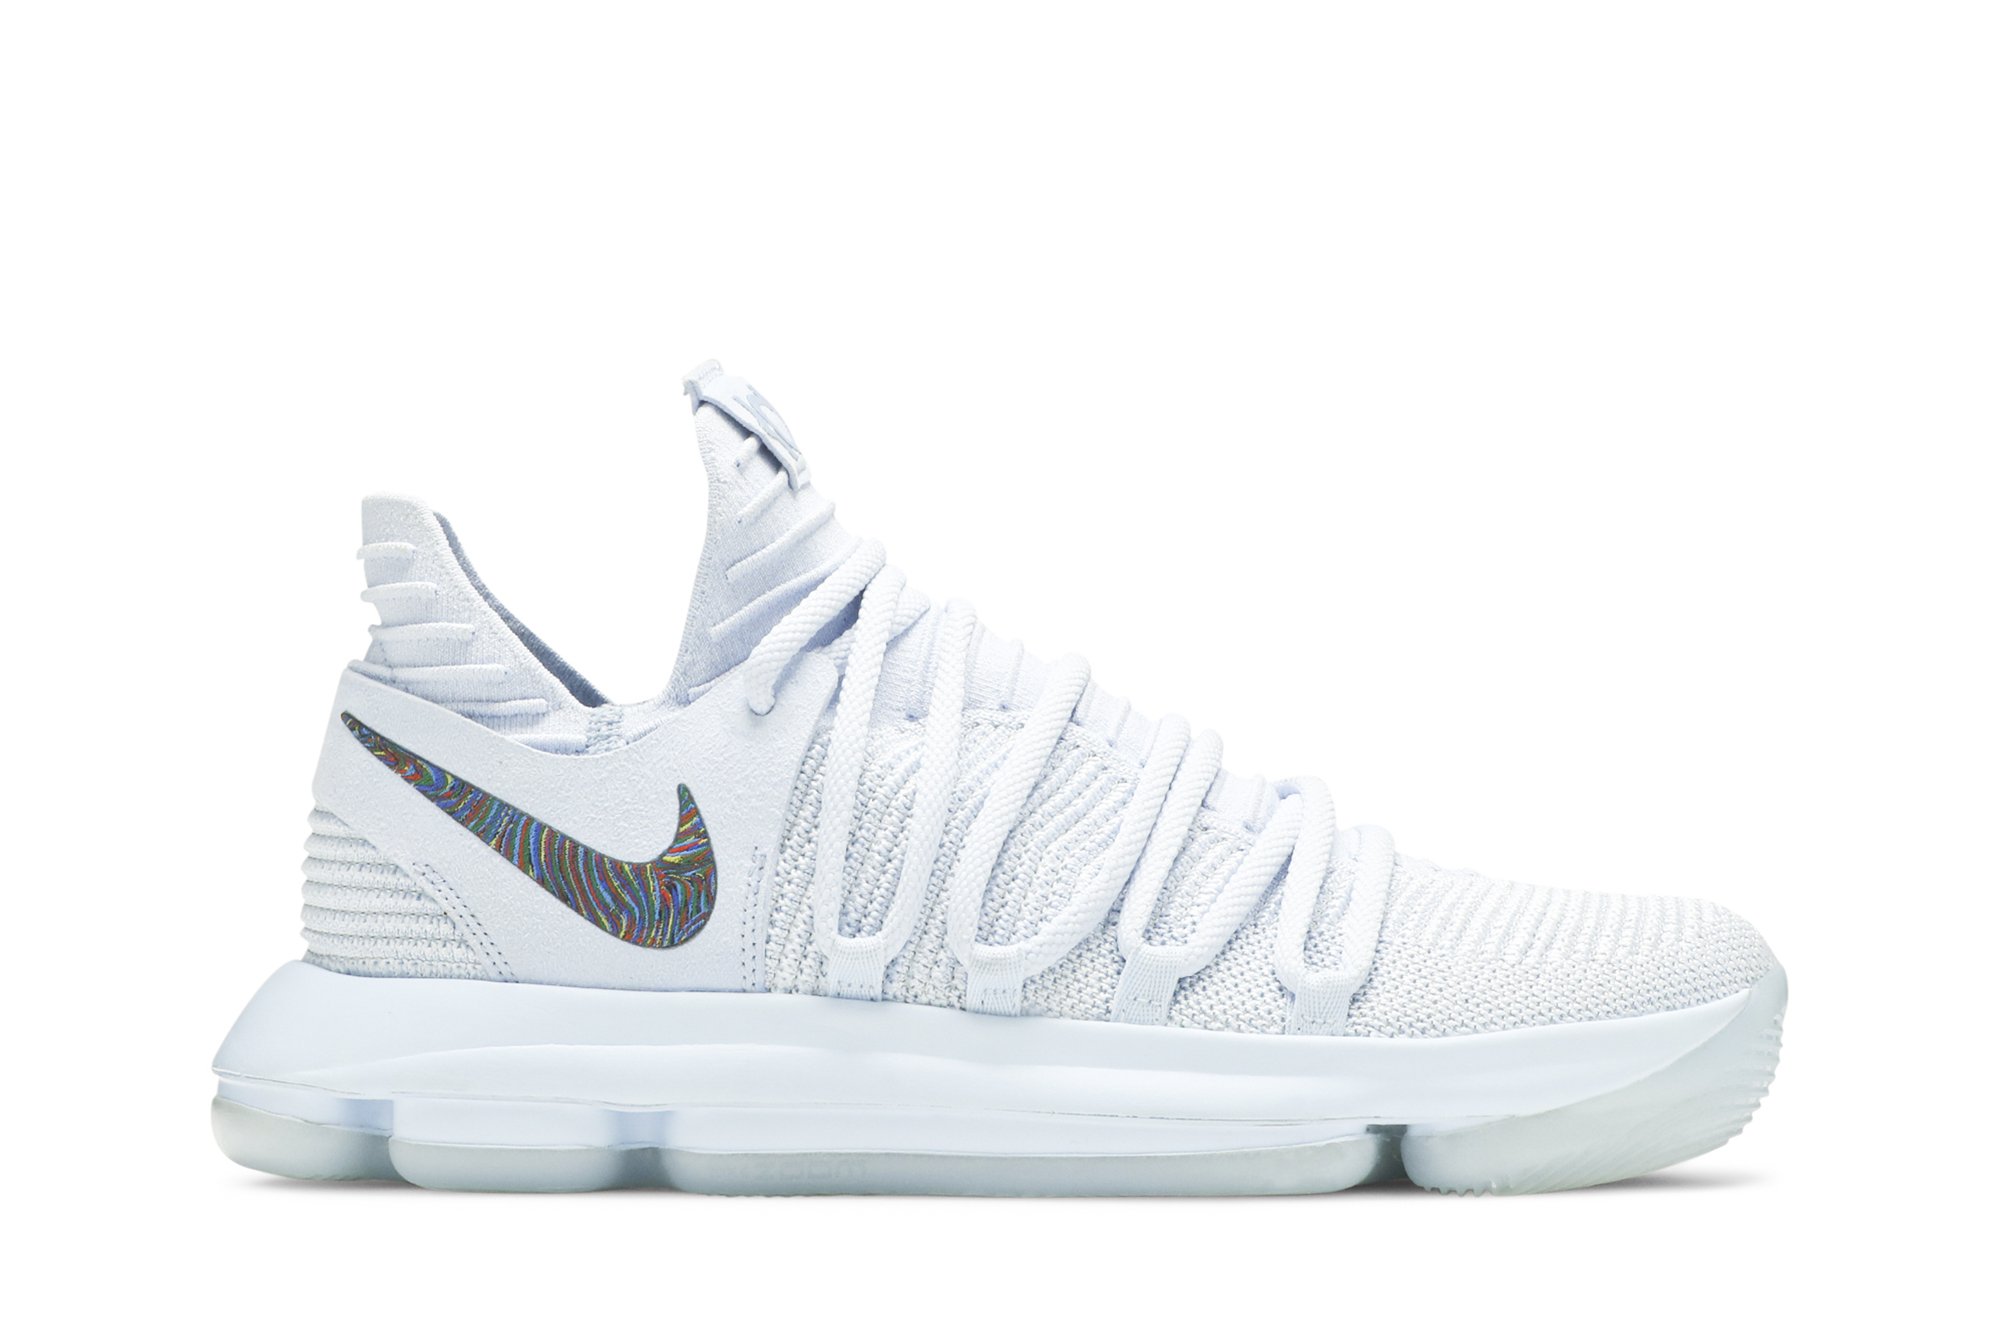 KD 10 Limited 'Anniversary'